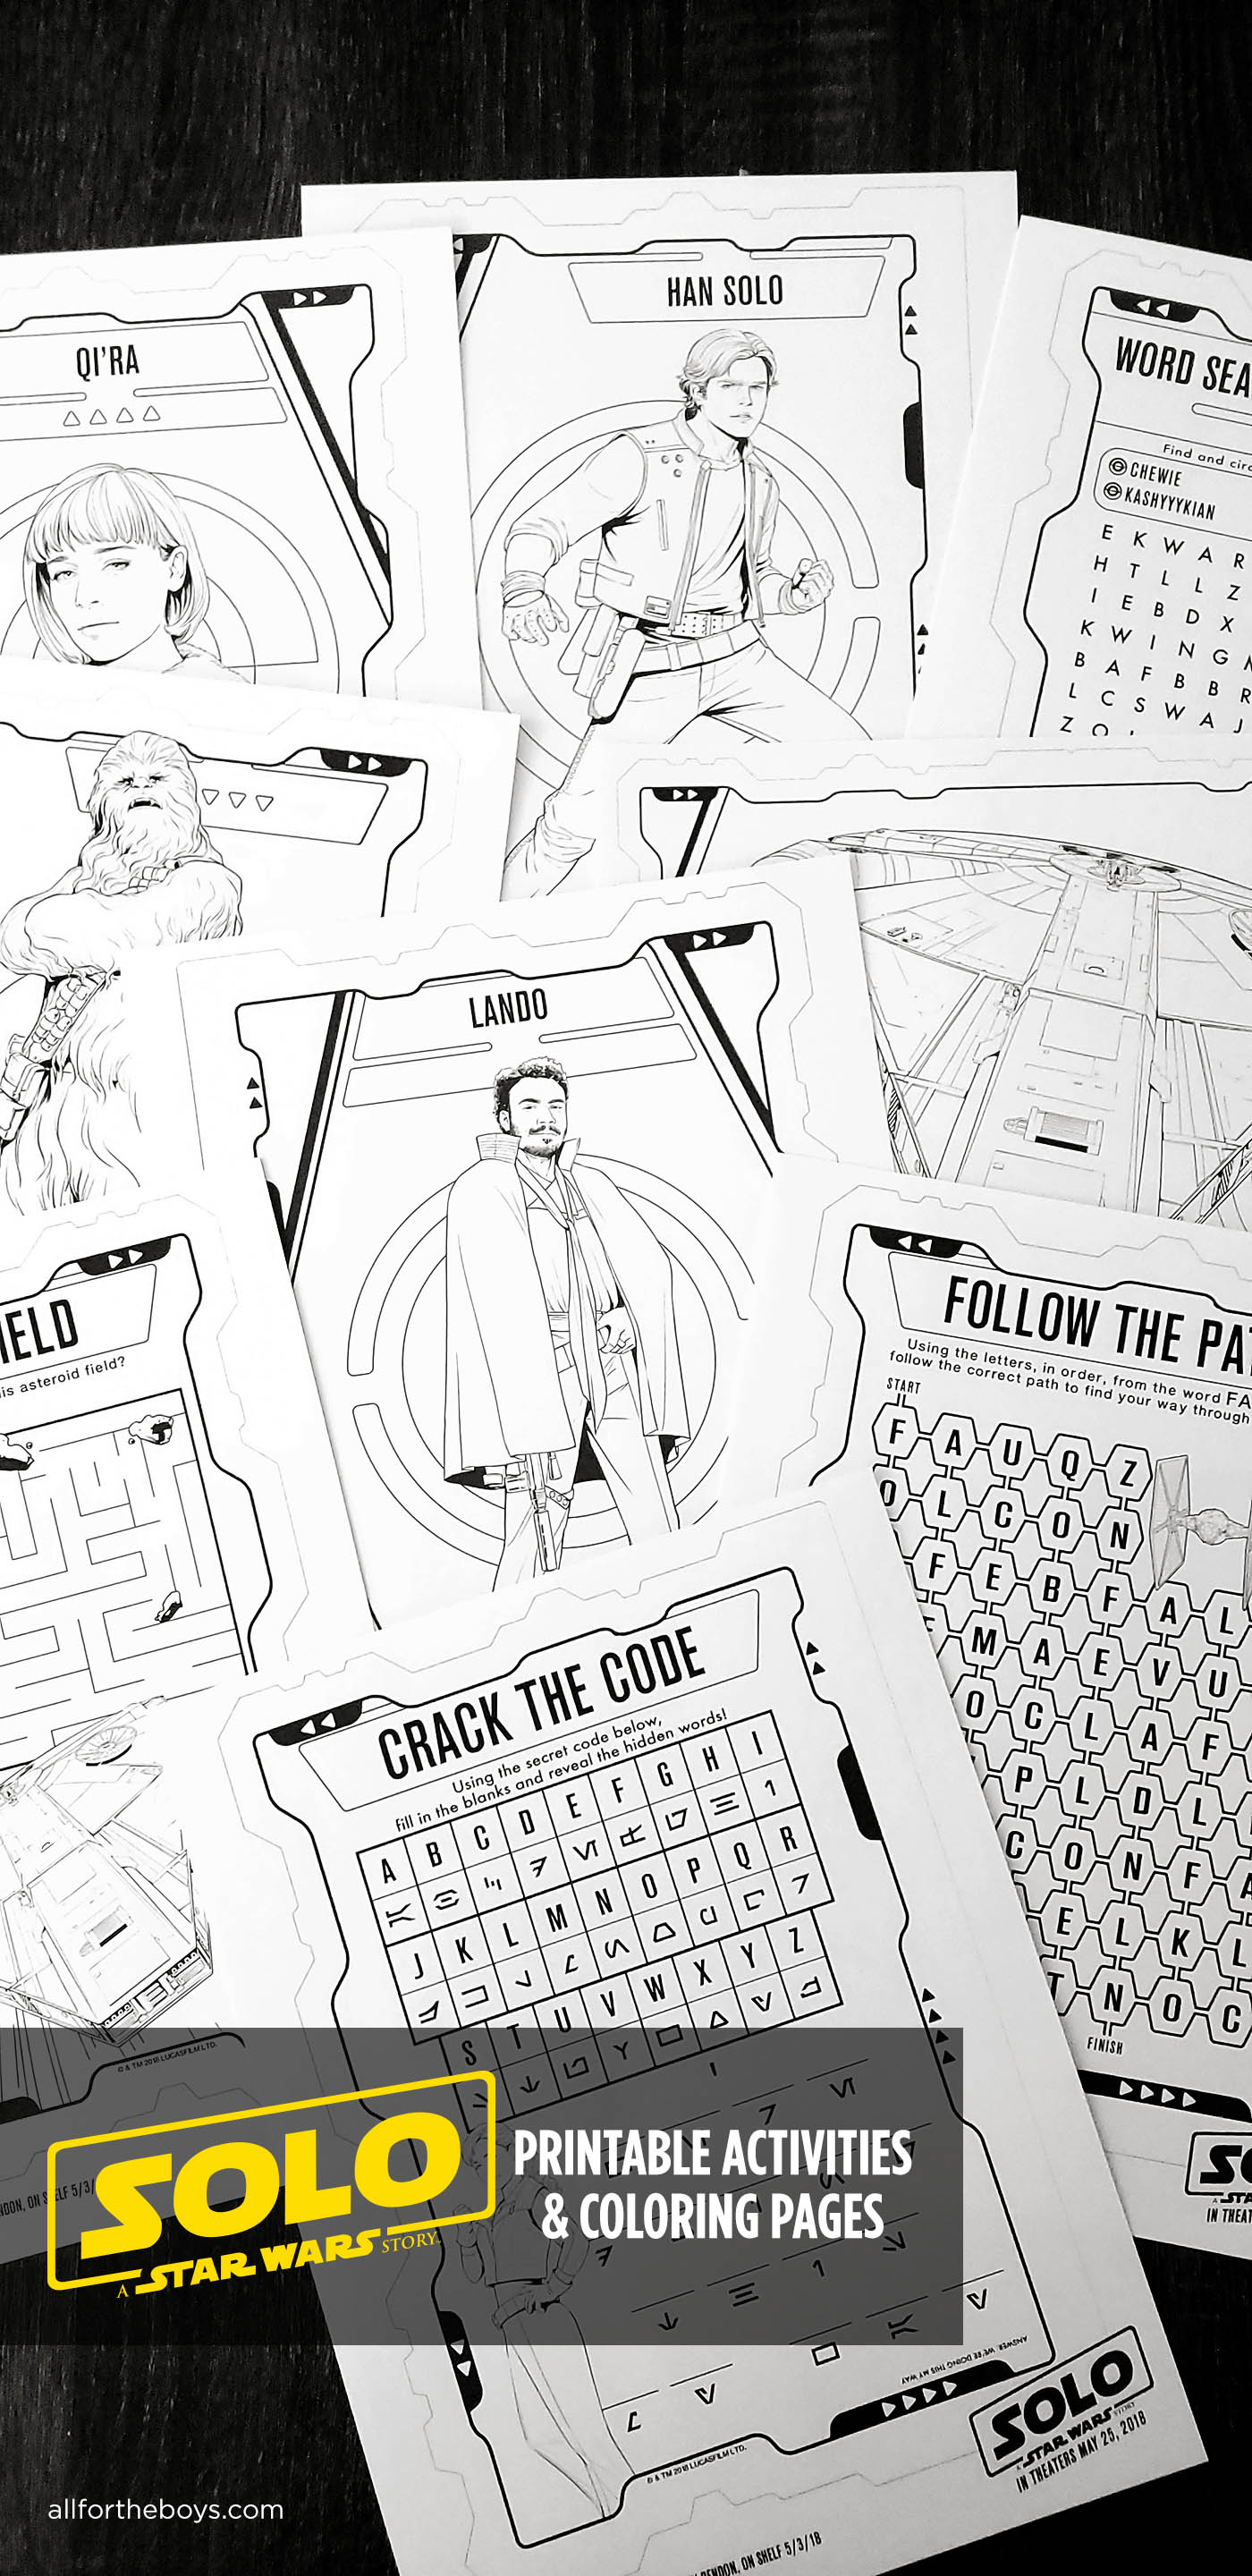 Solo: A Star Wars Story printable activities and coloring pages